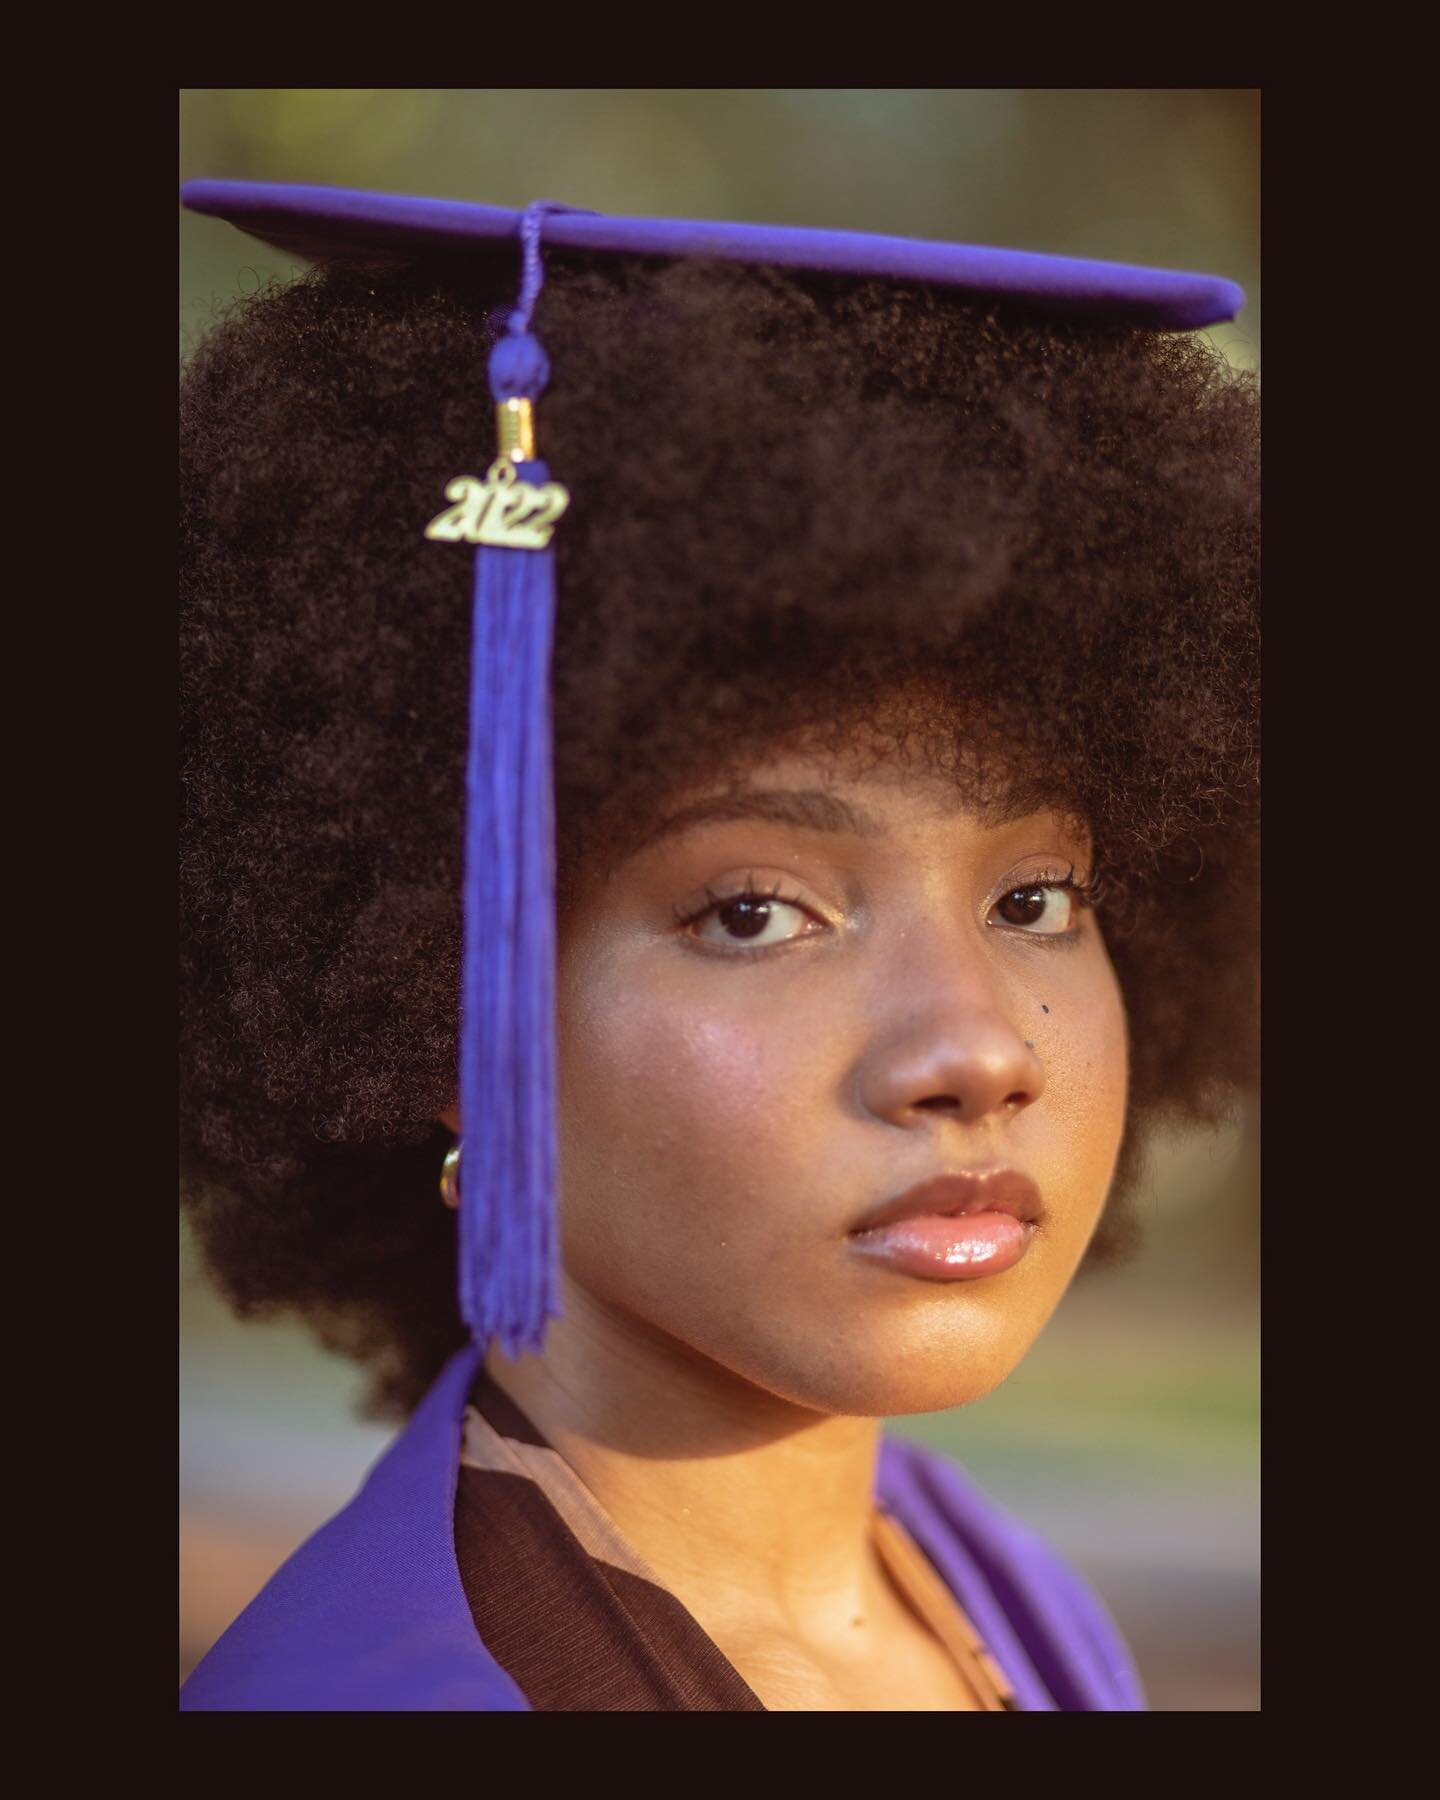 A grad portrait session from Last Year with Trinity ❣️

&mdash;&mdash;&mdash;

Are you ready to capture the excitement and achievement of your graduation? 🎓📸

Book a grad portrait photo session with Black Shell Studio and let's create stunning imag